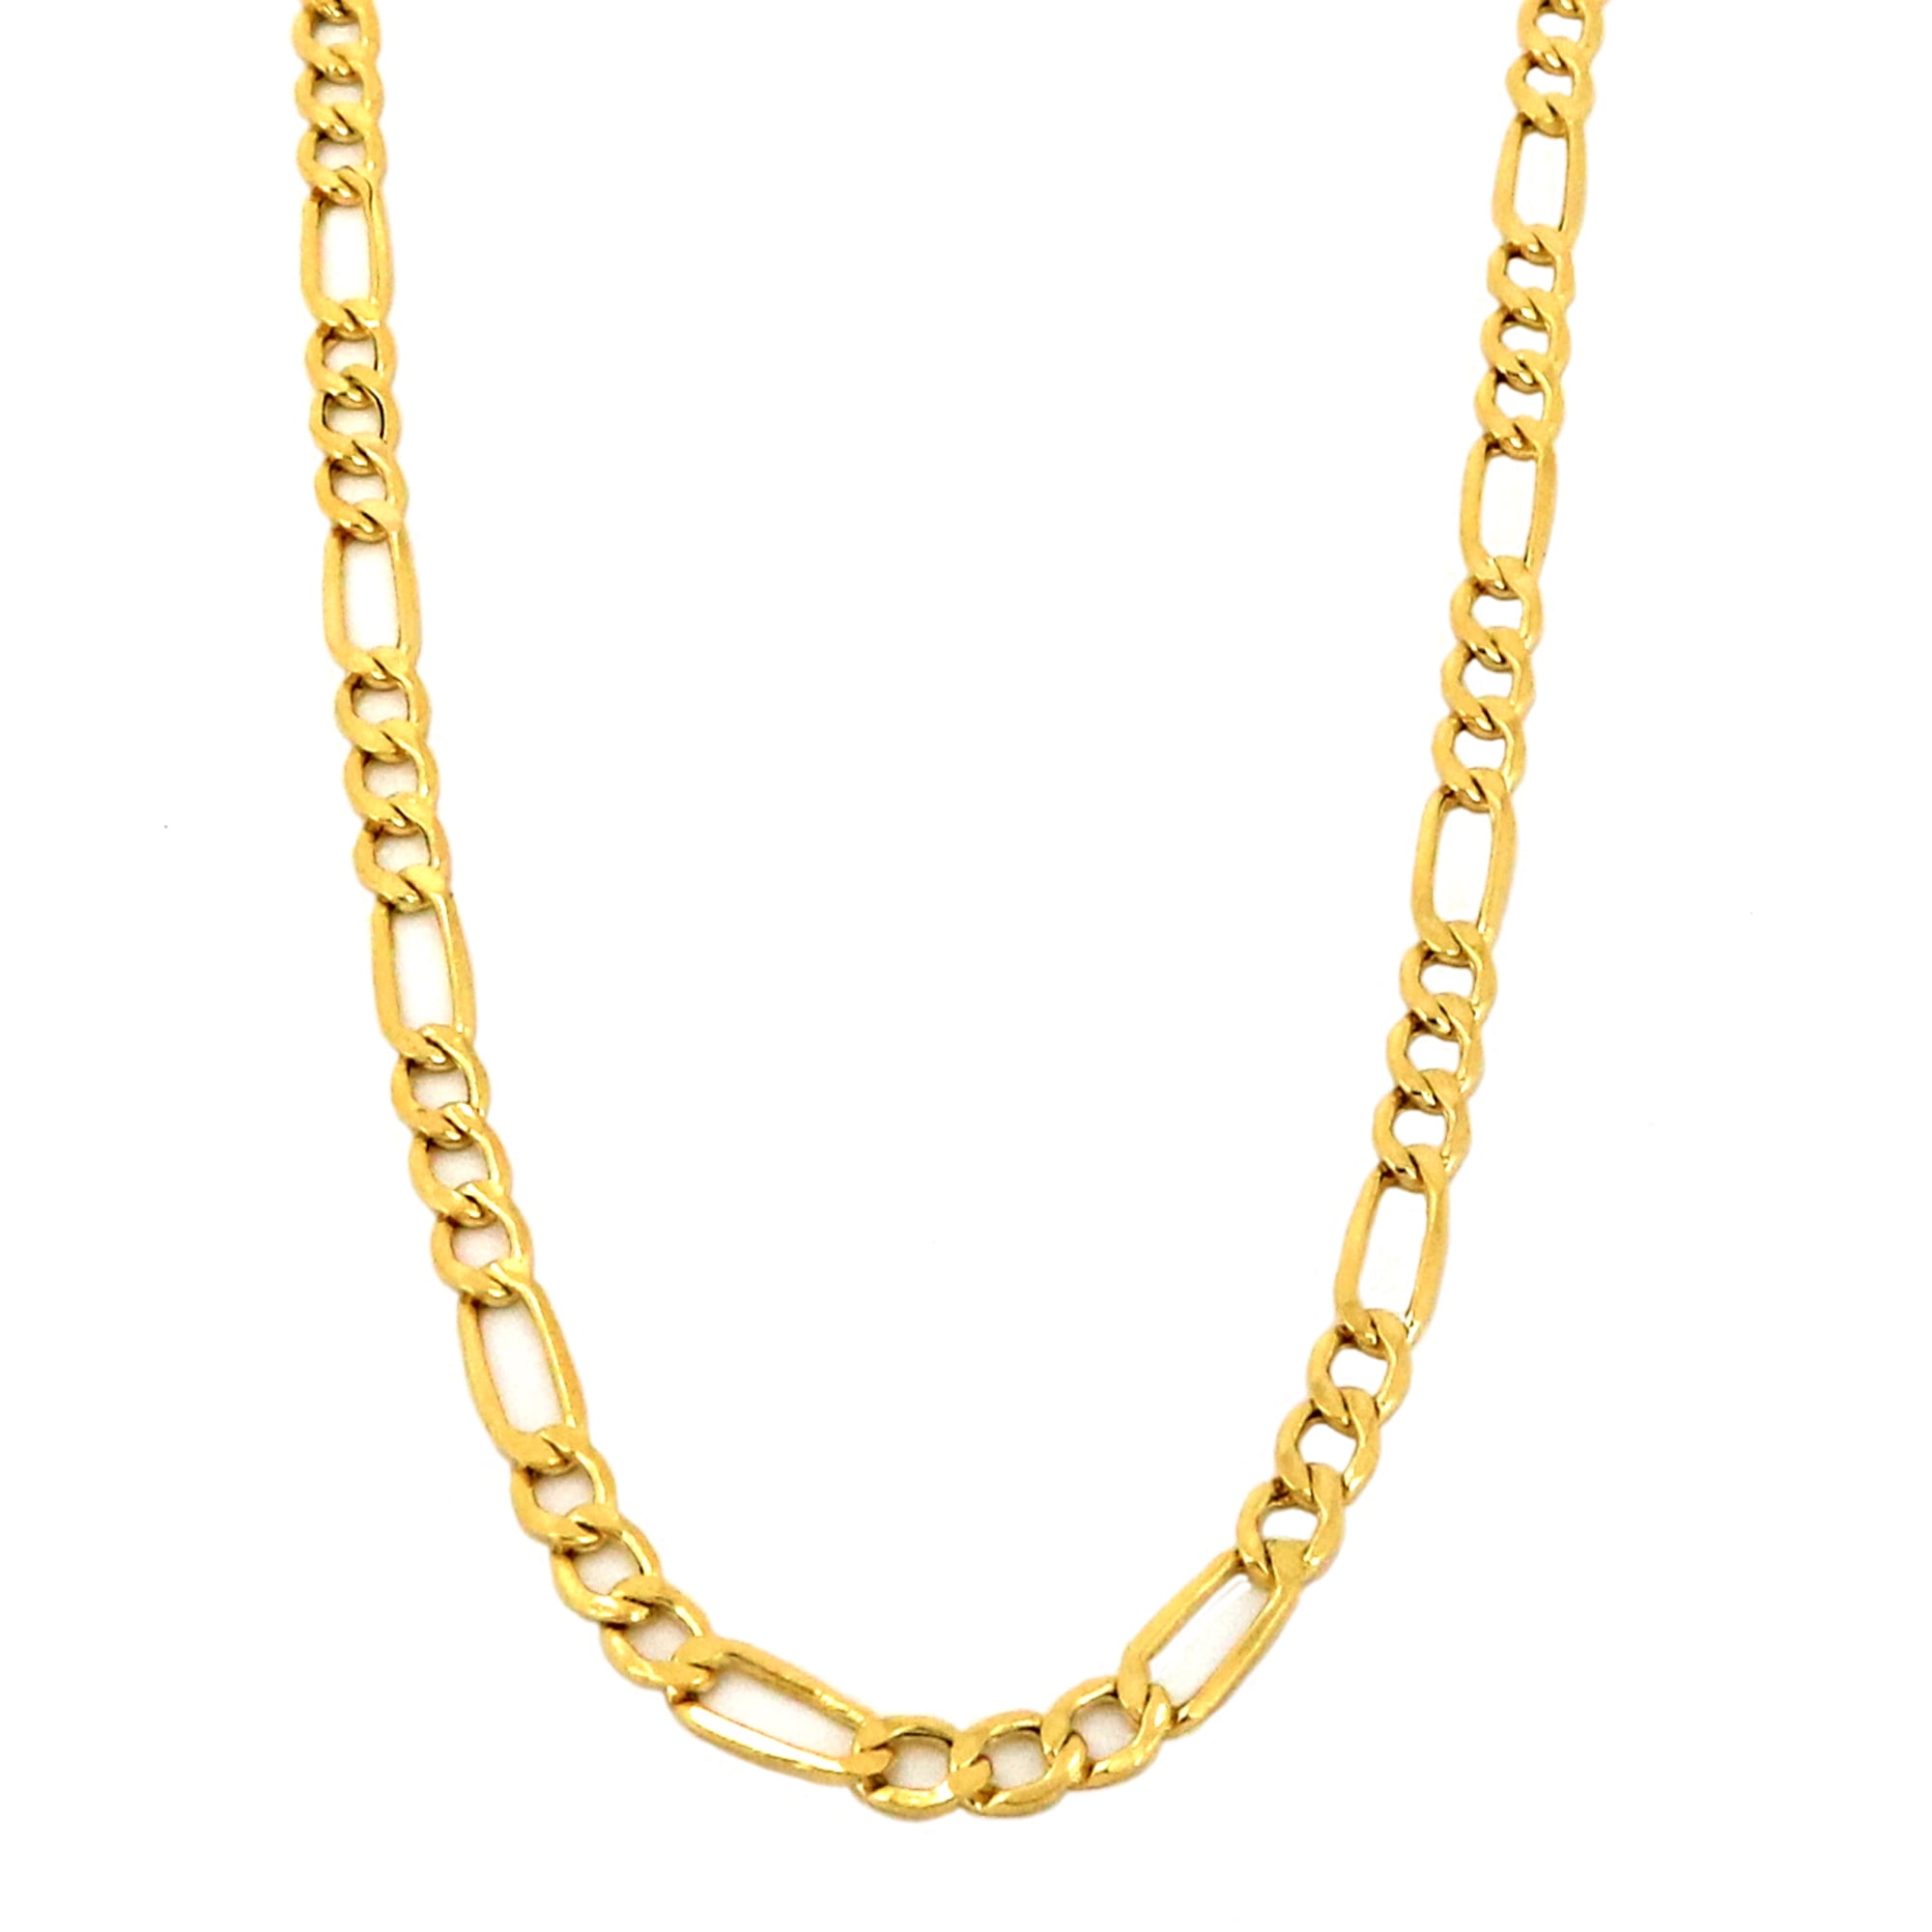 Details about   7.5mm Italian Curb Cuban Link Bracelet Lobster Clasp 14K Yellow Gold Finish 